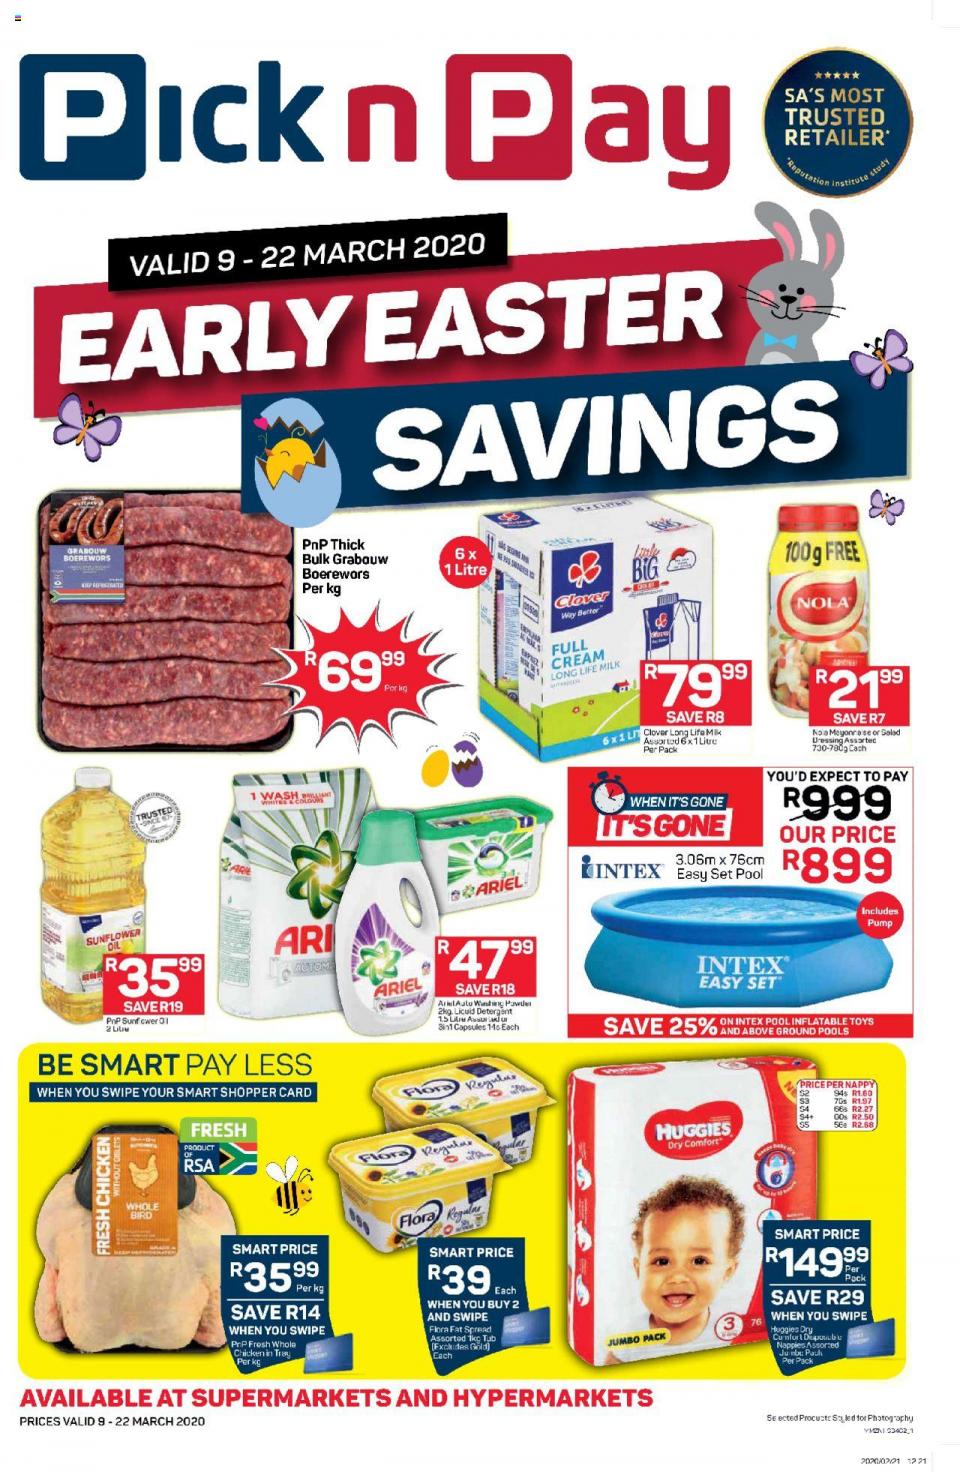 Pick n Pay Specials Early Easter Savings 09 February 2020